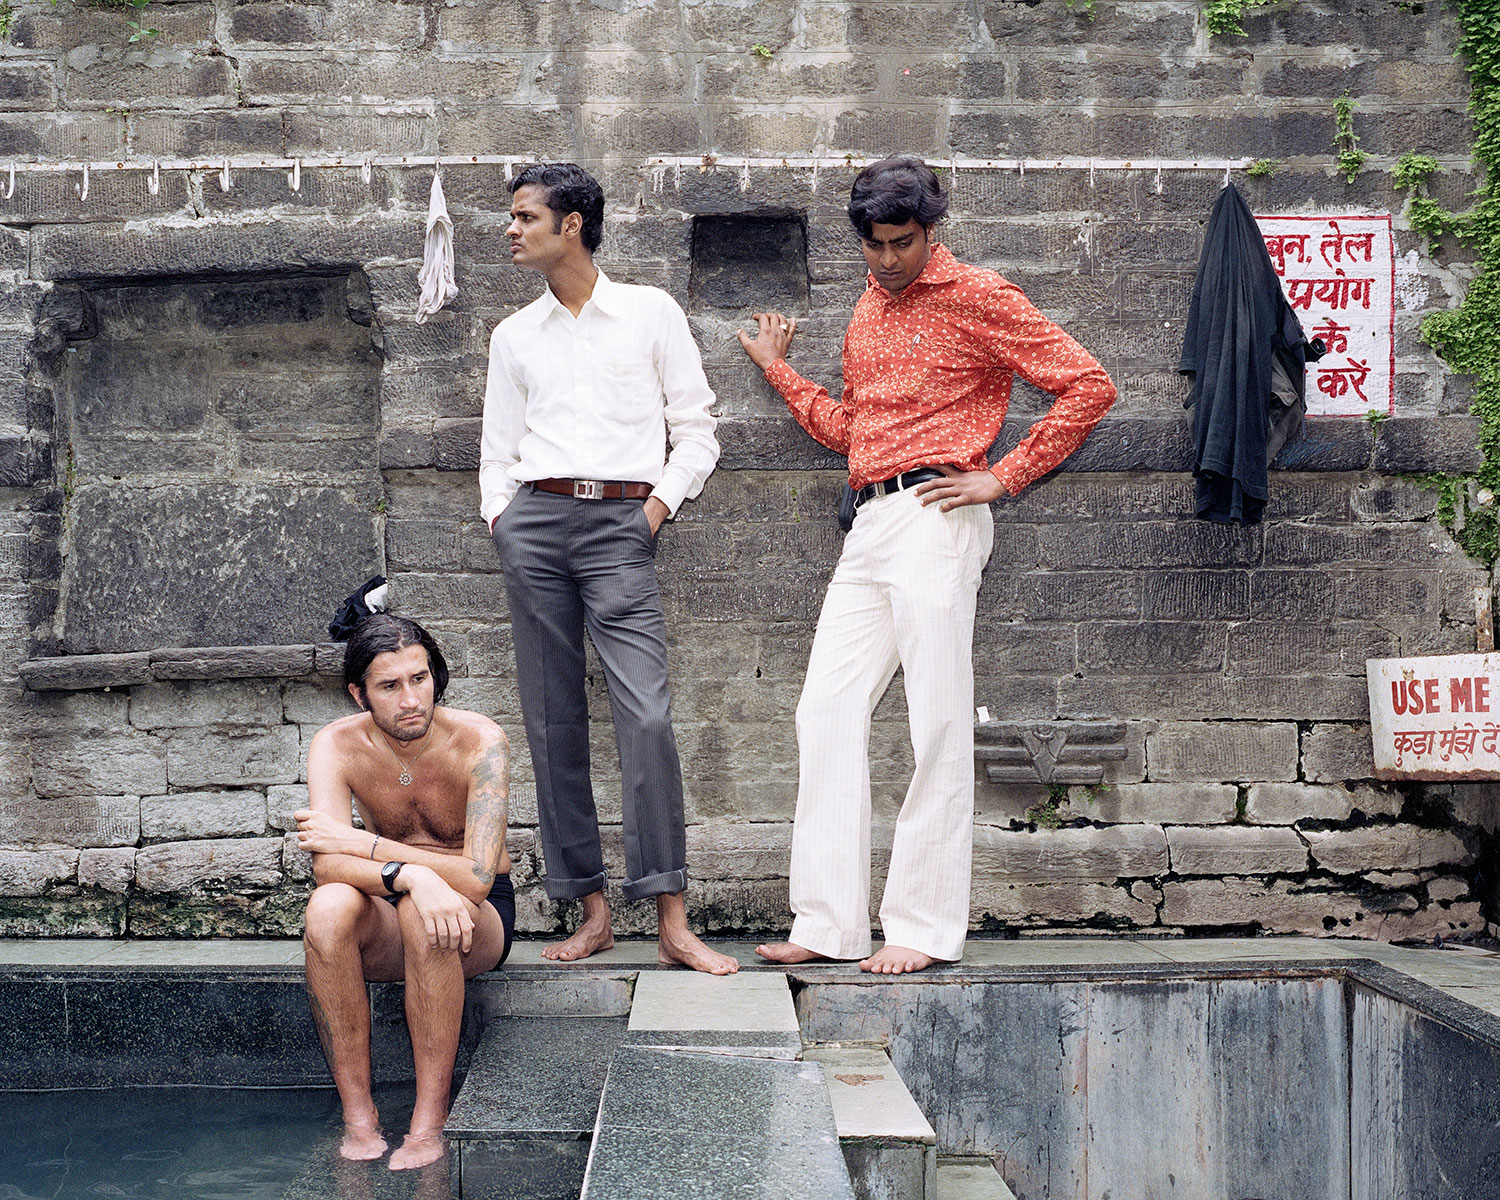 An Italian backpacker and two Indians, who, judging from their dress, are probably visiting from the city, survey the hot spring in a temple in Vashisht, India, August 2007.